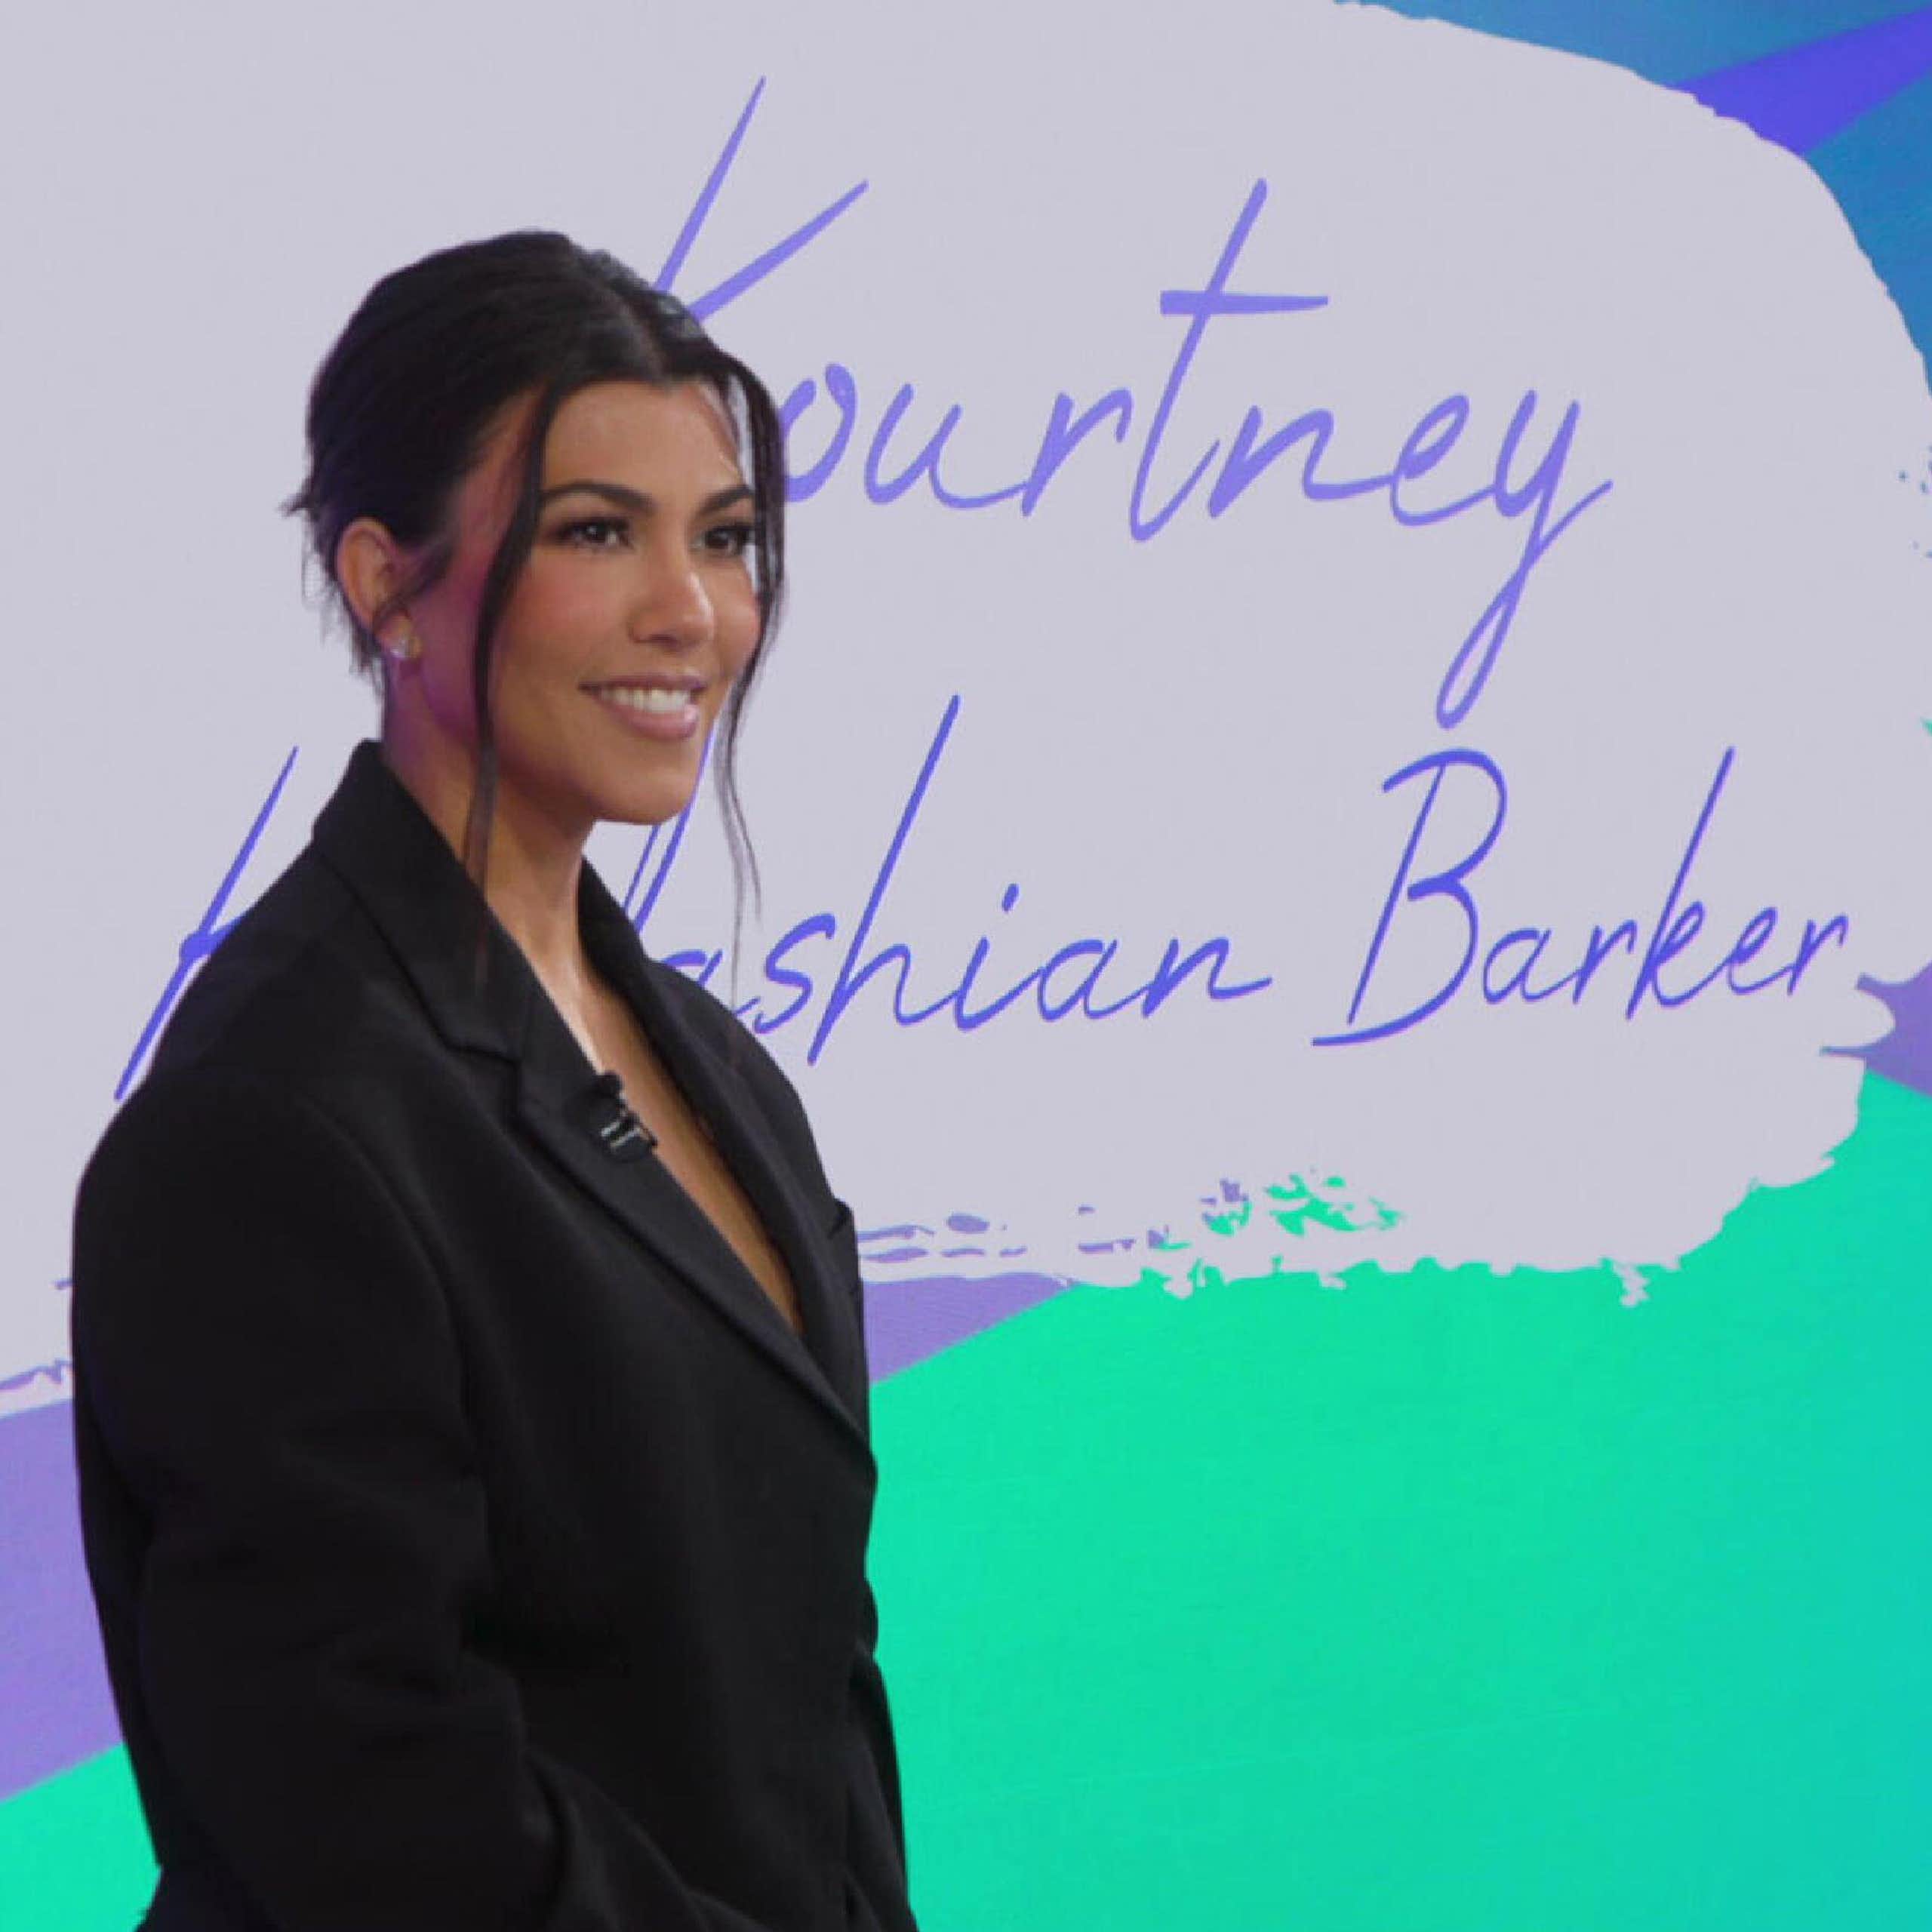 Kourtney Kardashian Barker isn’t the first to drink breast milk – but we know surprisingly little about its adult health benefits